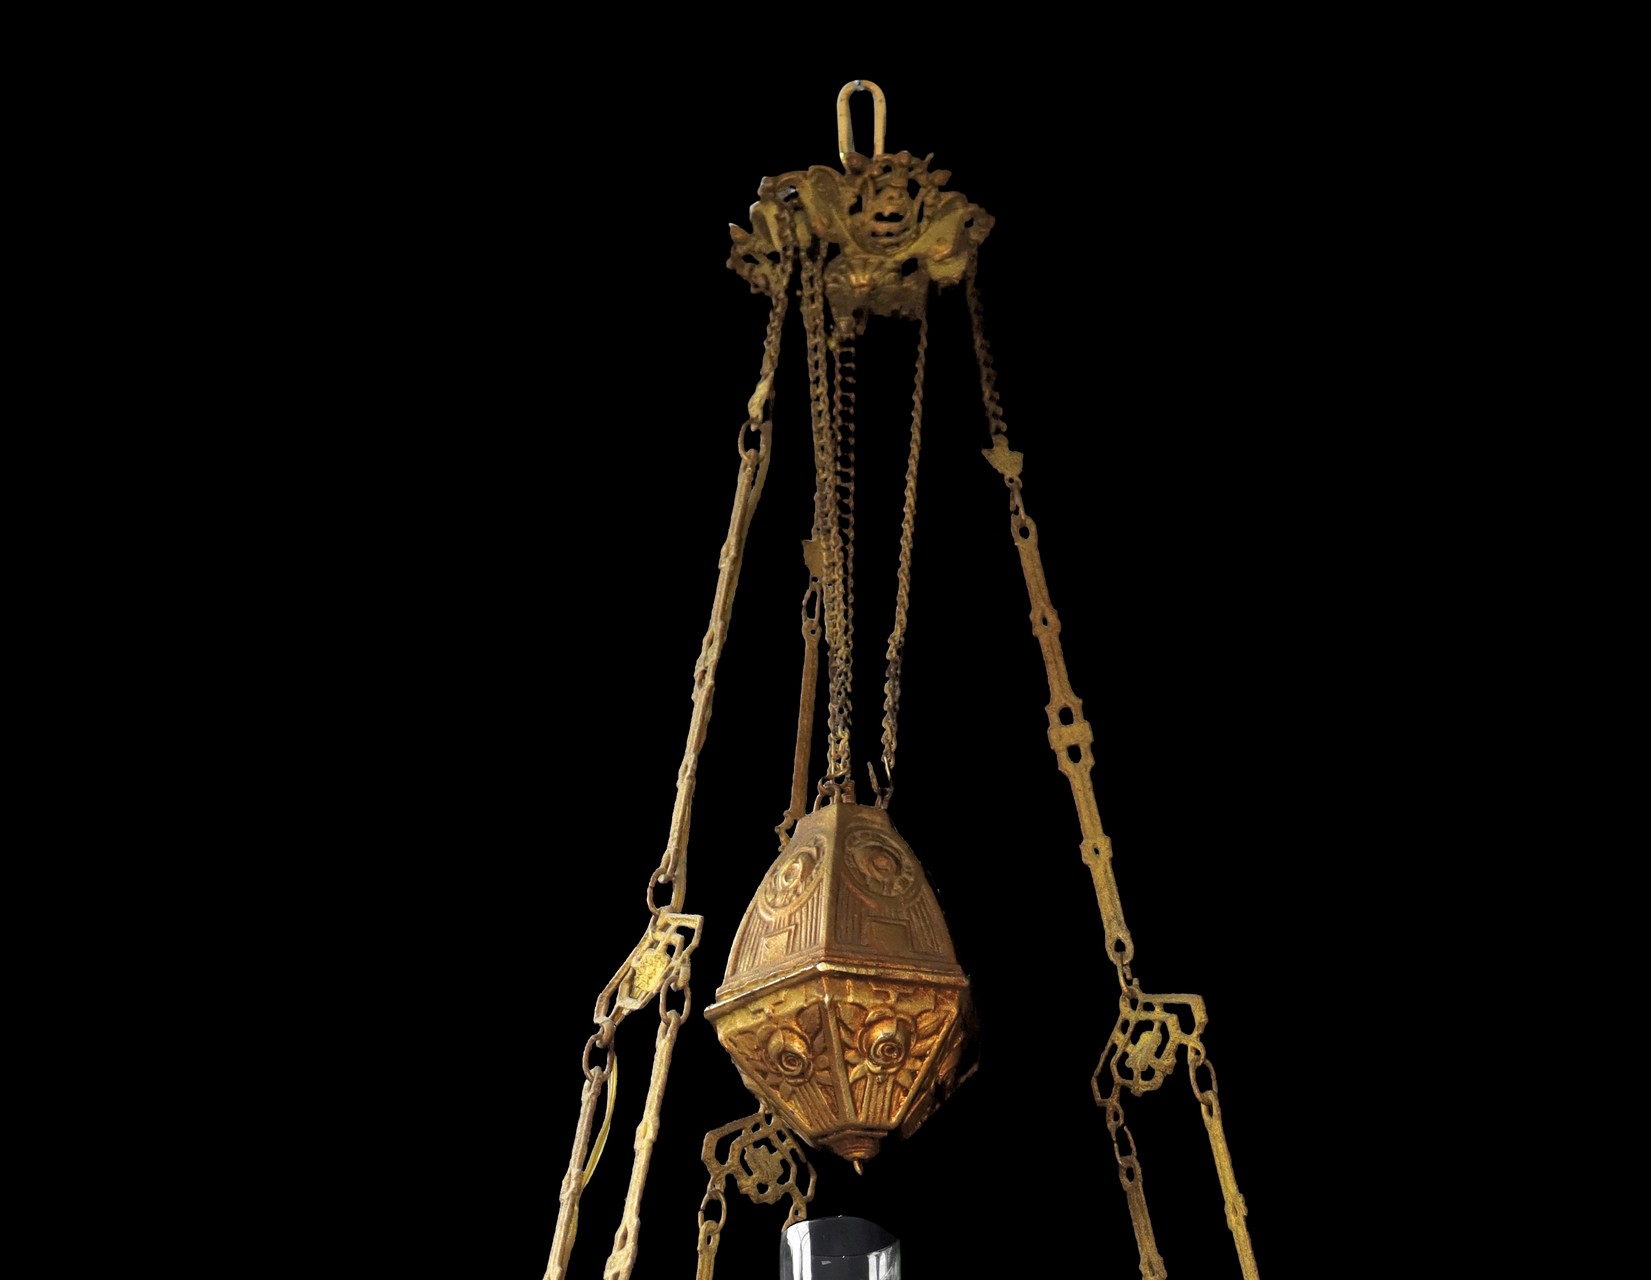 Pendant oil chandelier, Early 20th century - Image 4 of 4